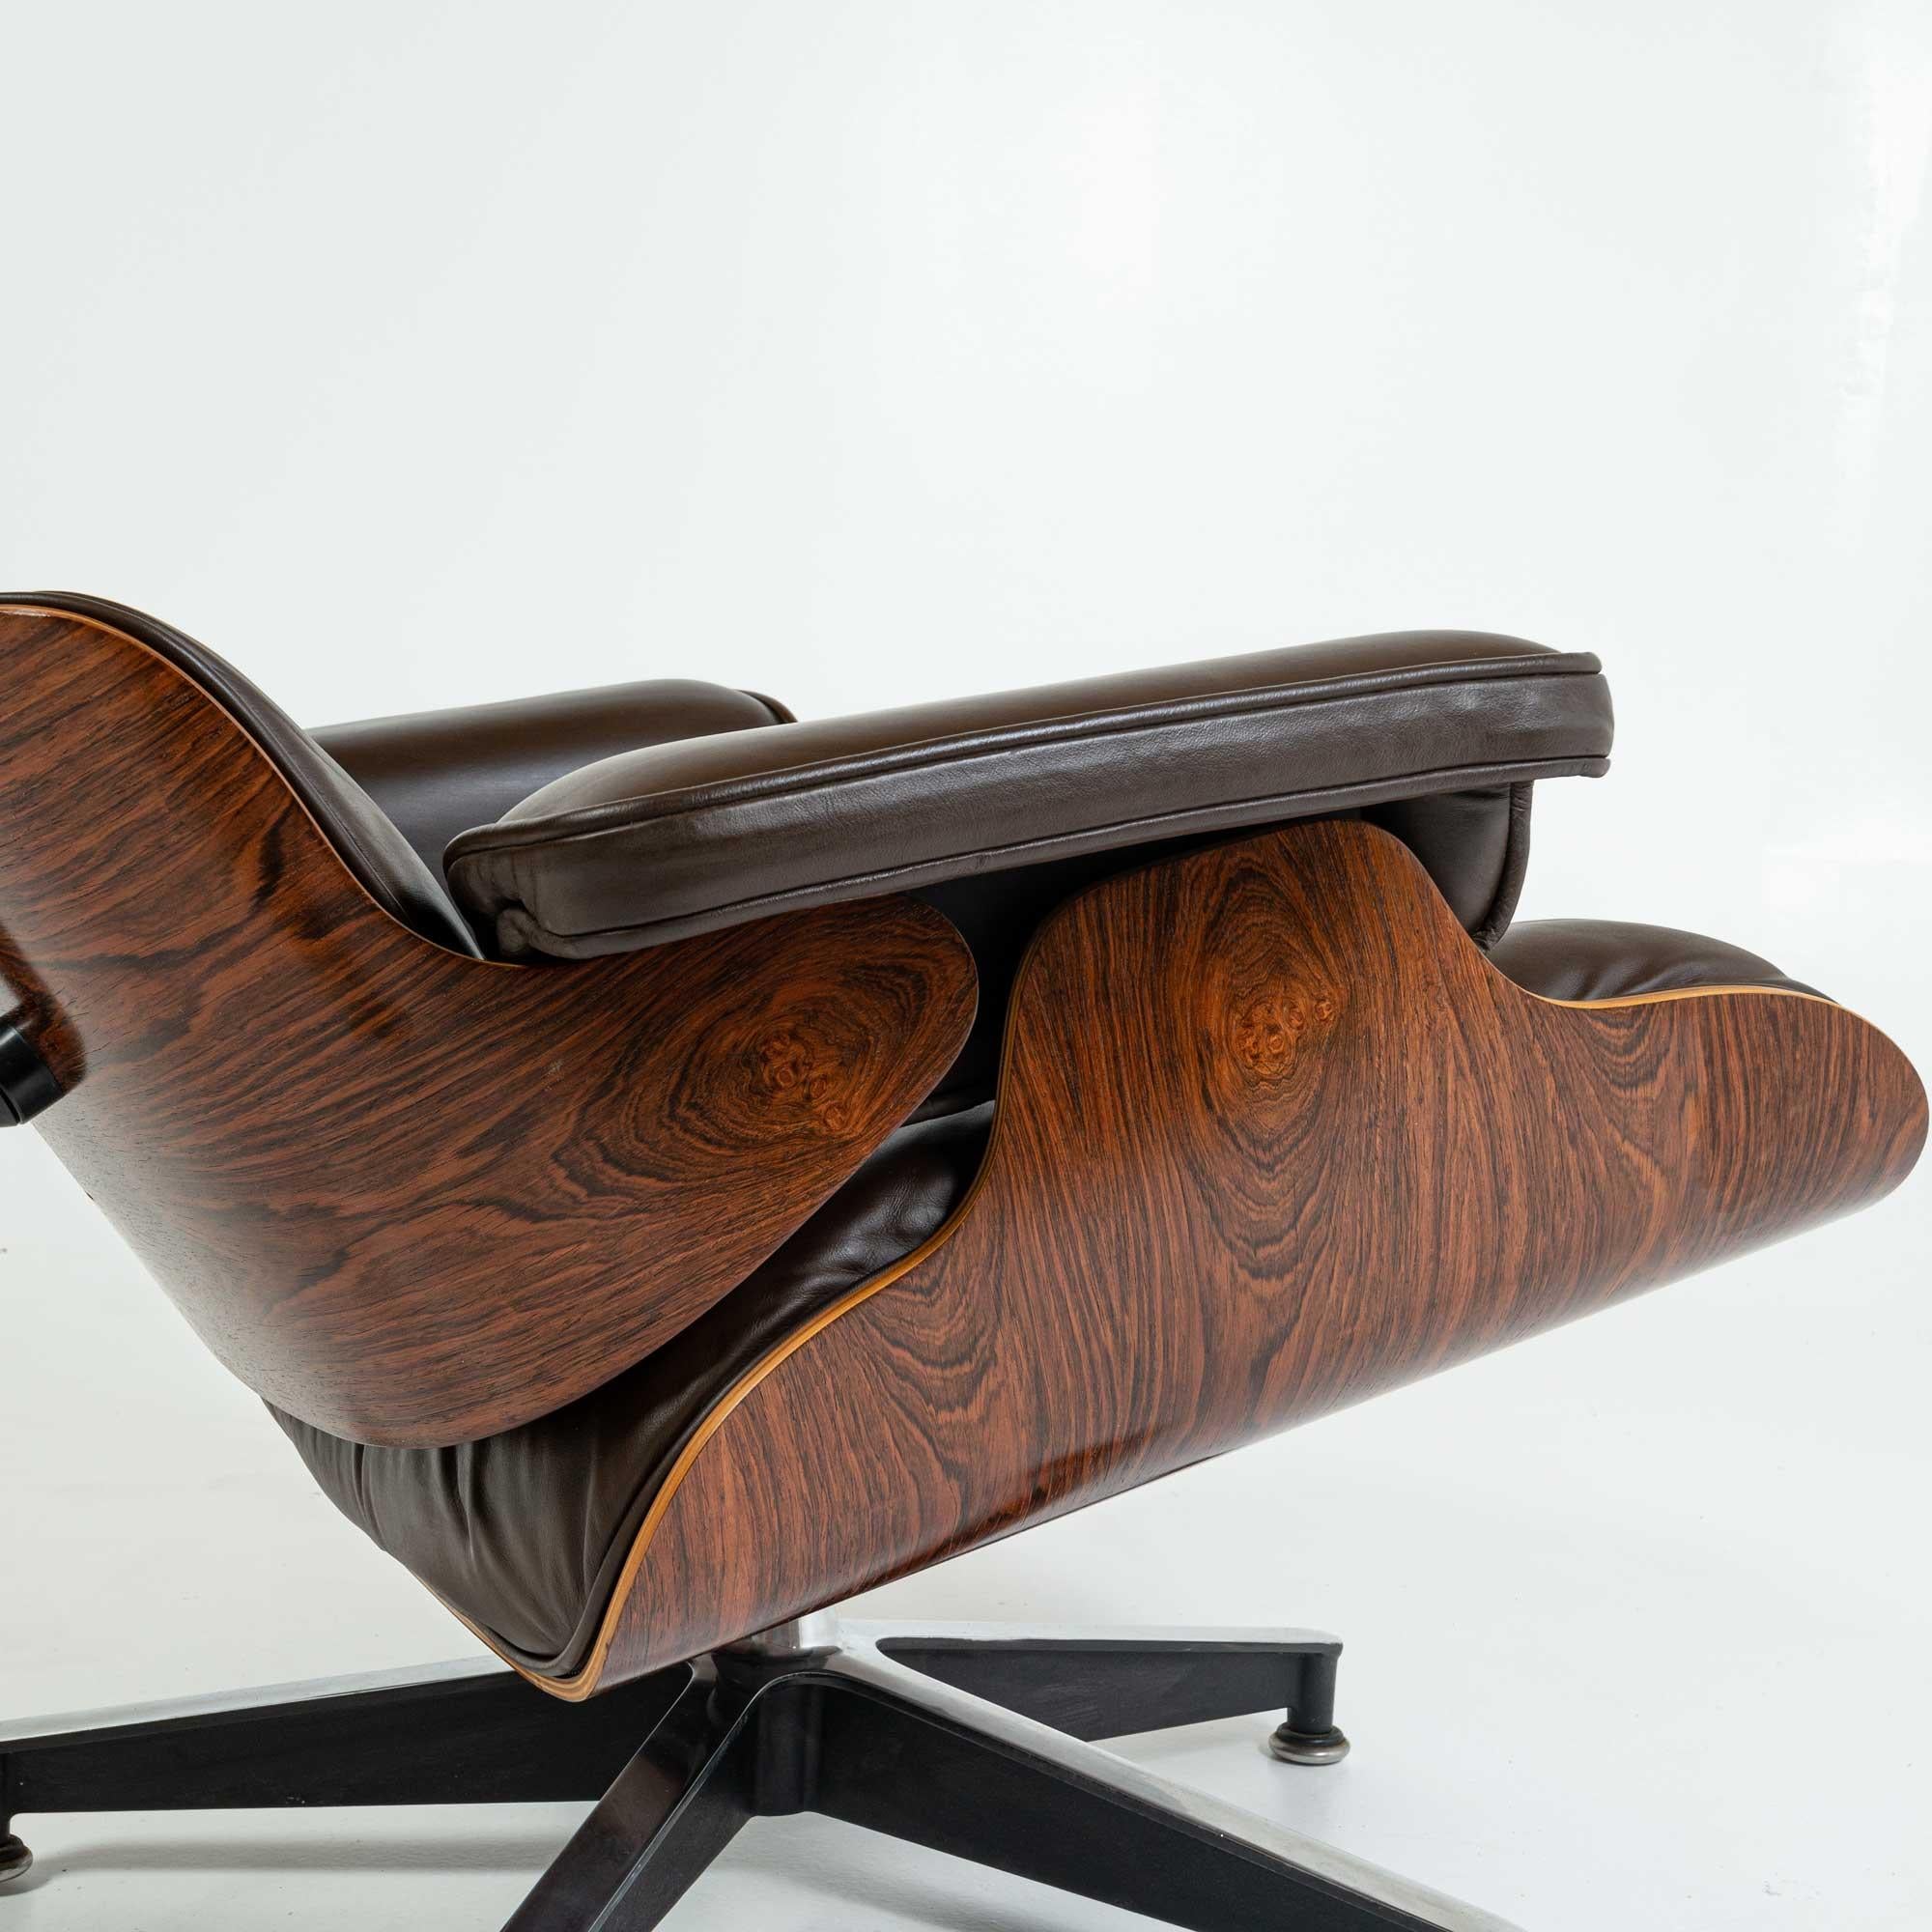 3rd Gen Eames Lounge Chair 670-671 in Original Chocolate Leather For Sale 3